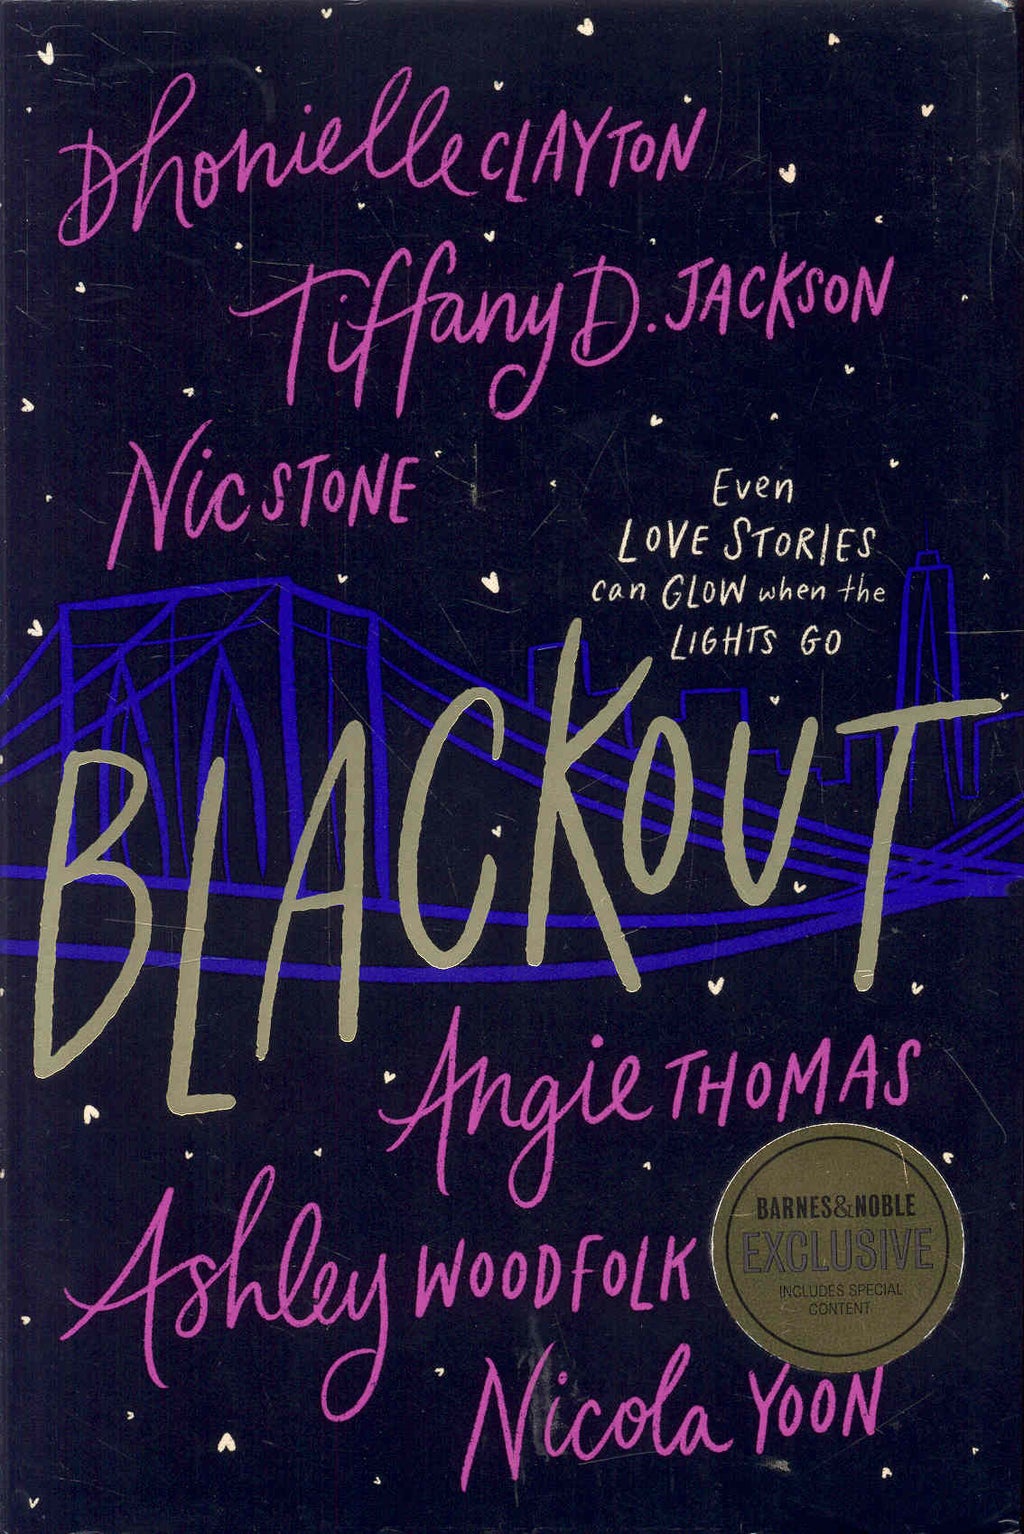 “Blackout” by Dhonielle Clayton, Tiffany D. Jackson, Nic Stone, Angie Thomas, Ashley Woodfolk, and Nicola Yoon book cover